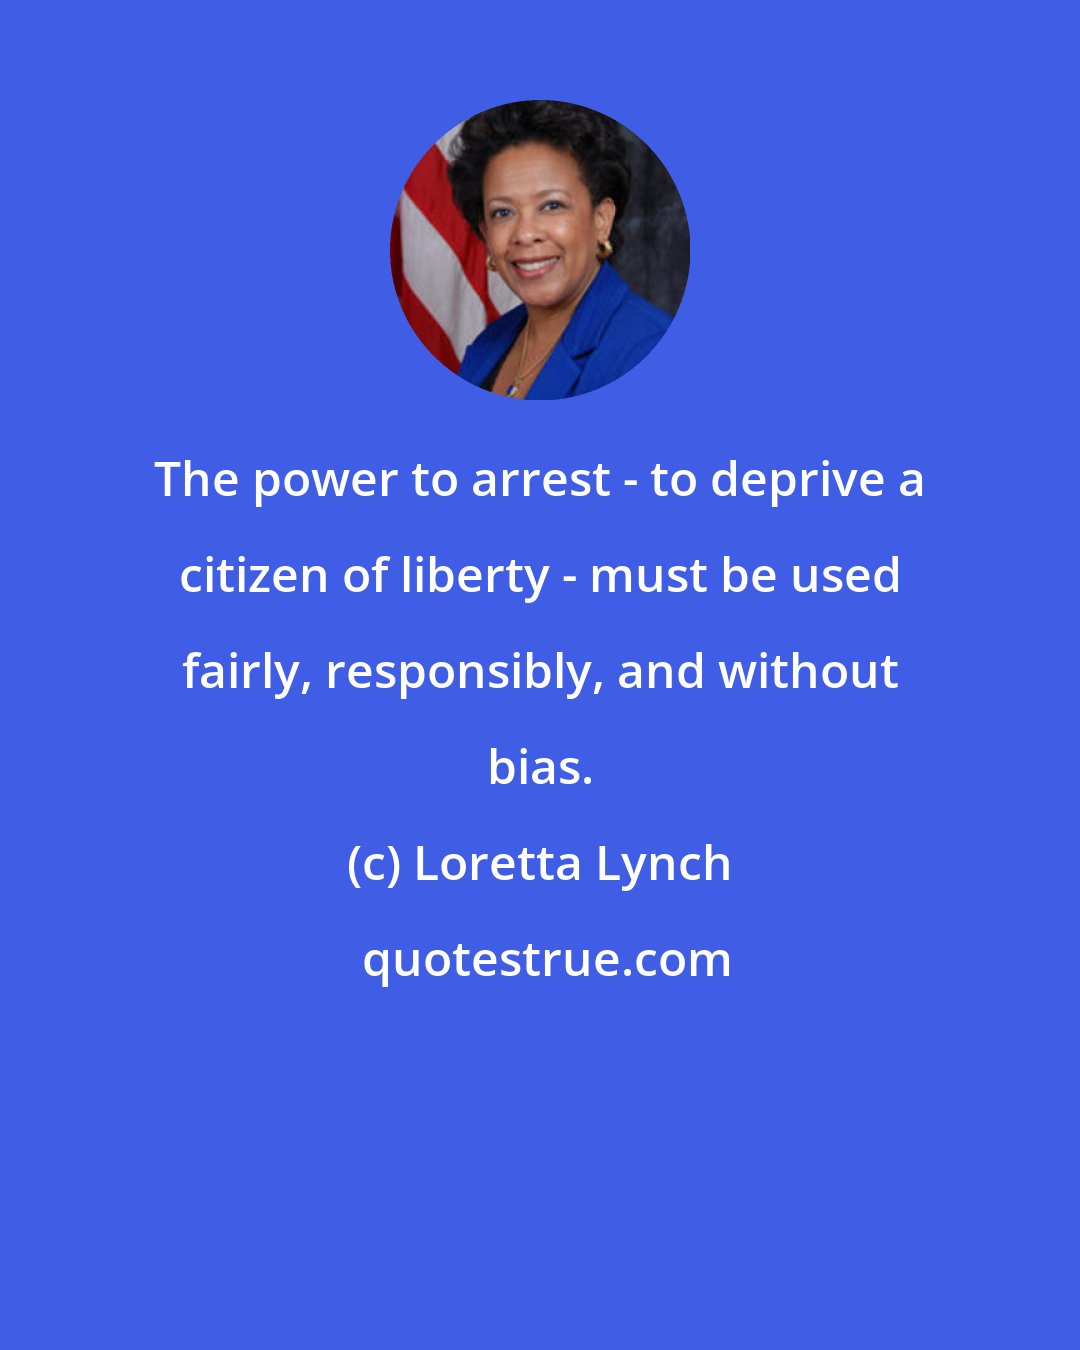 Loretta Lynch: The power to arrest - to deprive a citizen of liberty - must be used fairly, responsibly, and without bias.